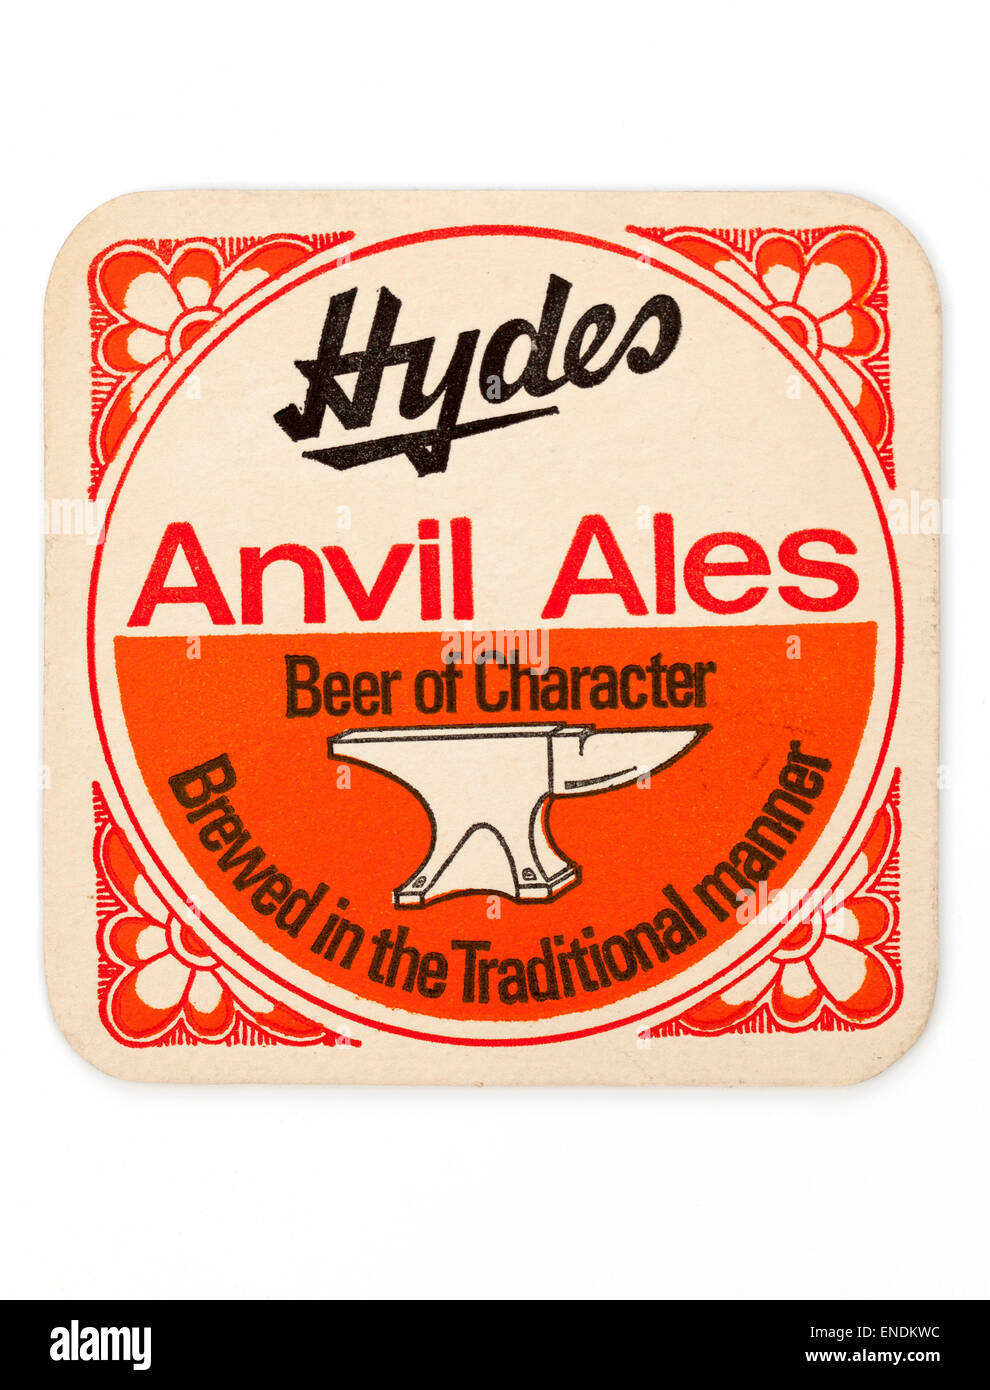 Vintage British Old Beermat or Coaster Advertising Hydes Brewery and Anvil Ales Stock Photo